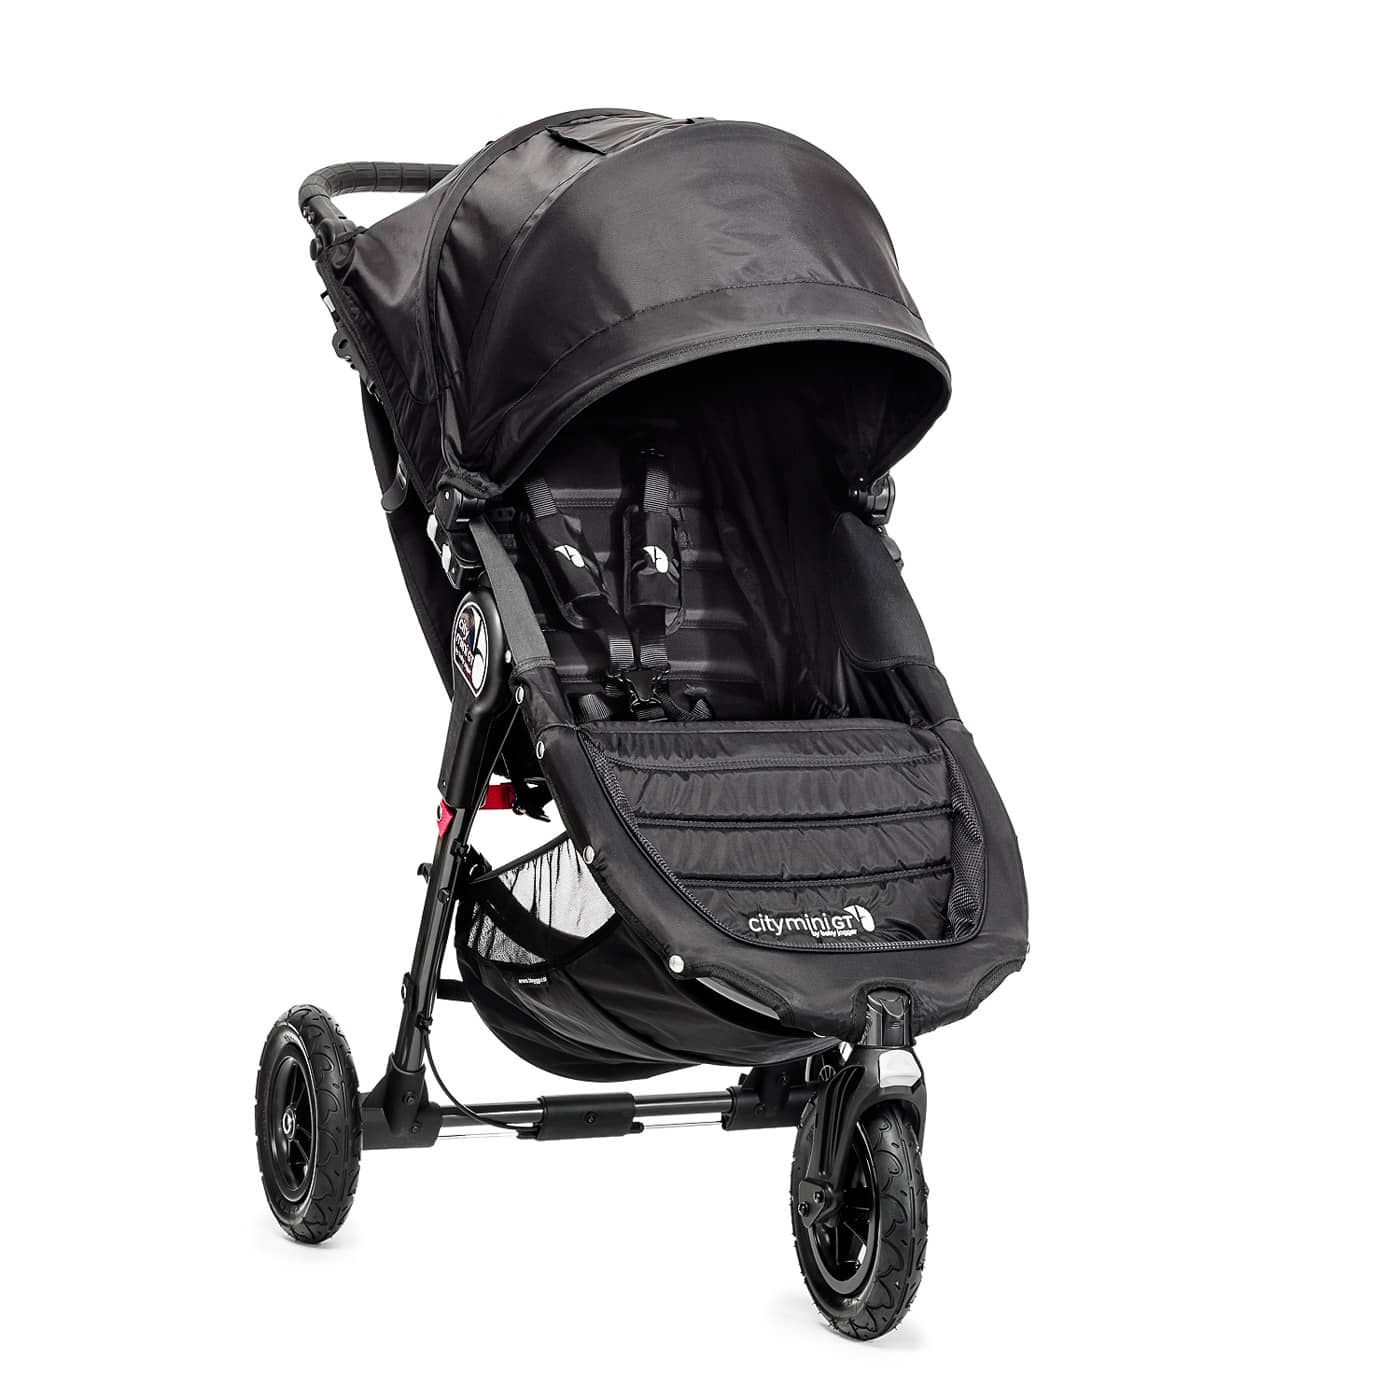 Clément - Discover the Pockit + All City stroller from GB.